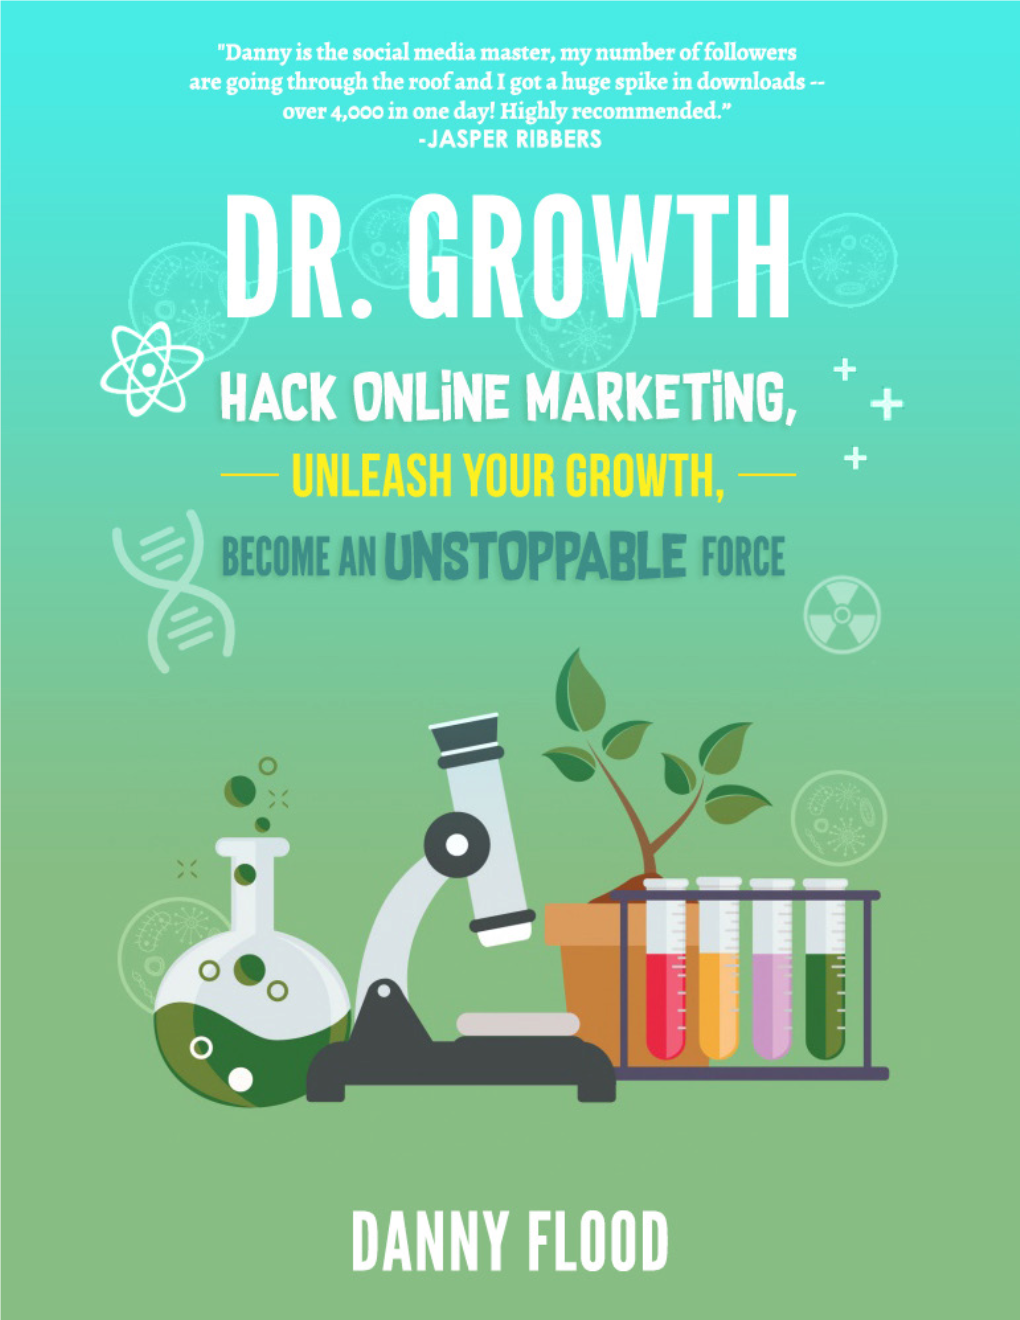 Growth Hacking and Marketing Campaigns